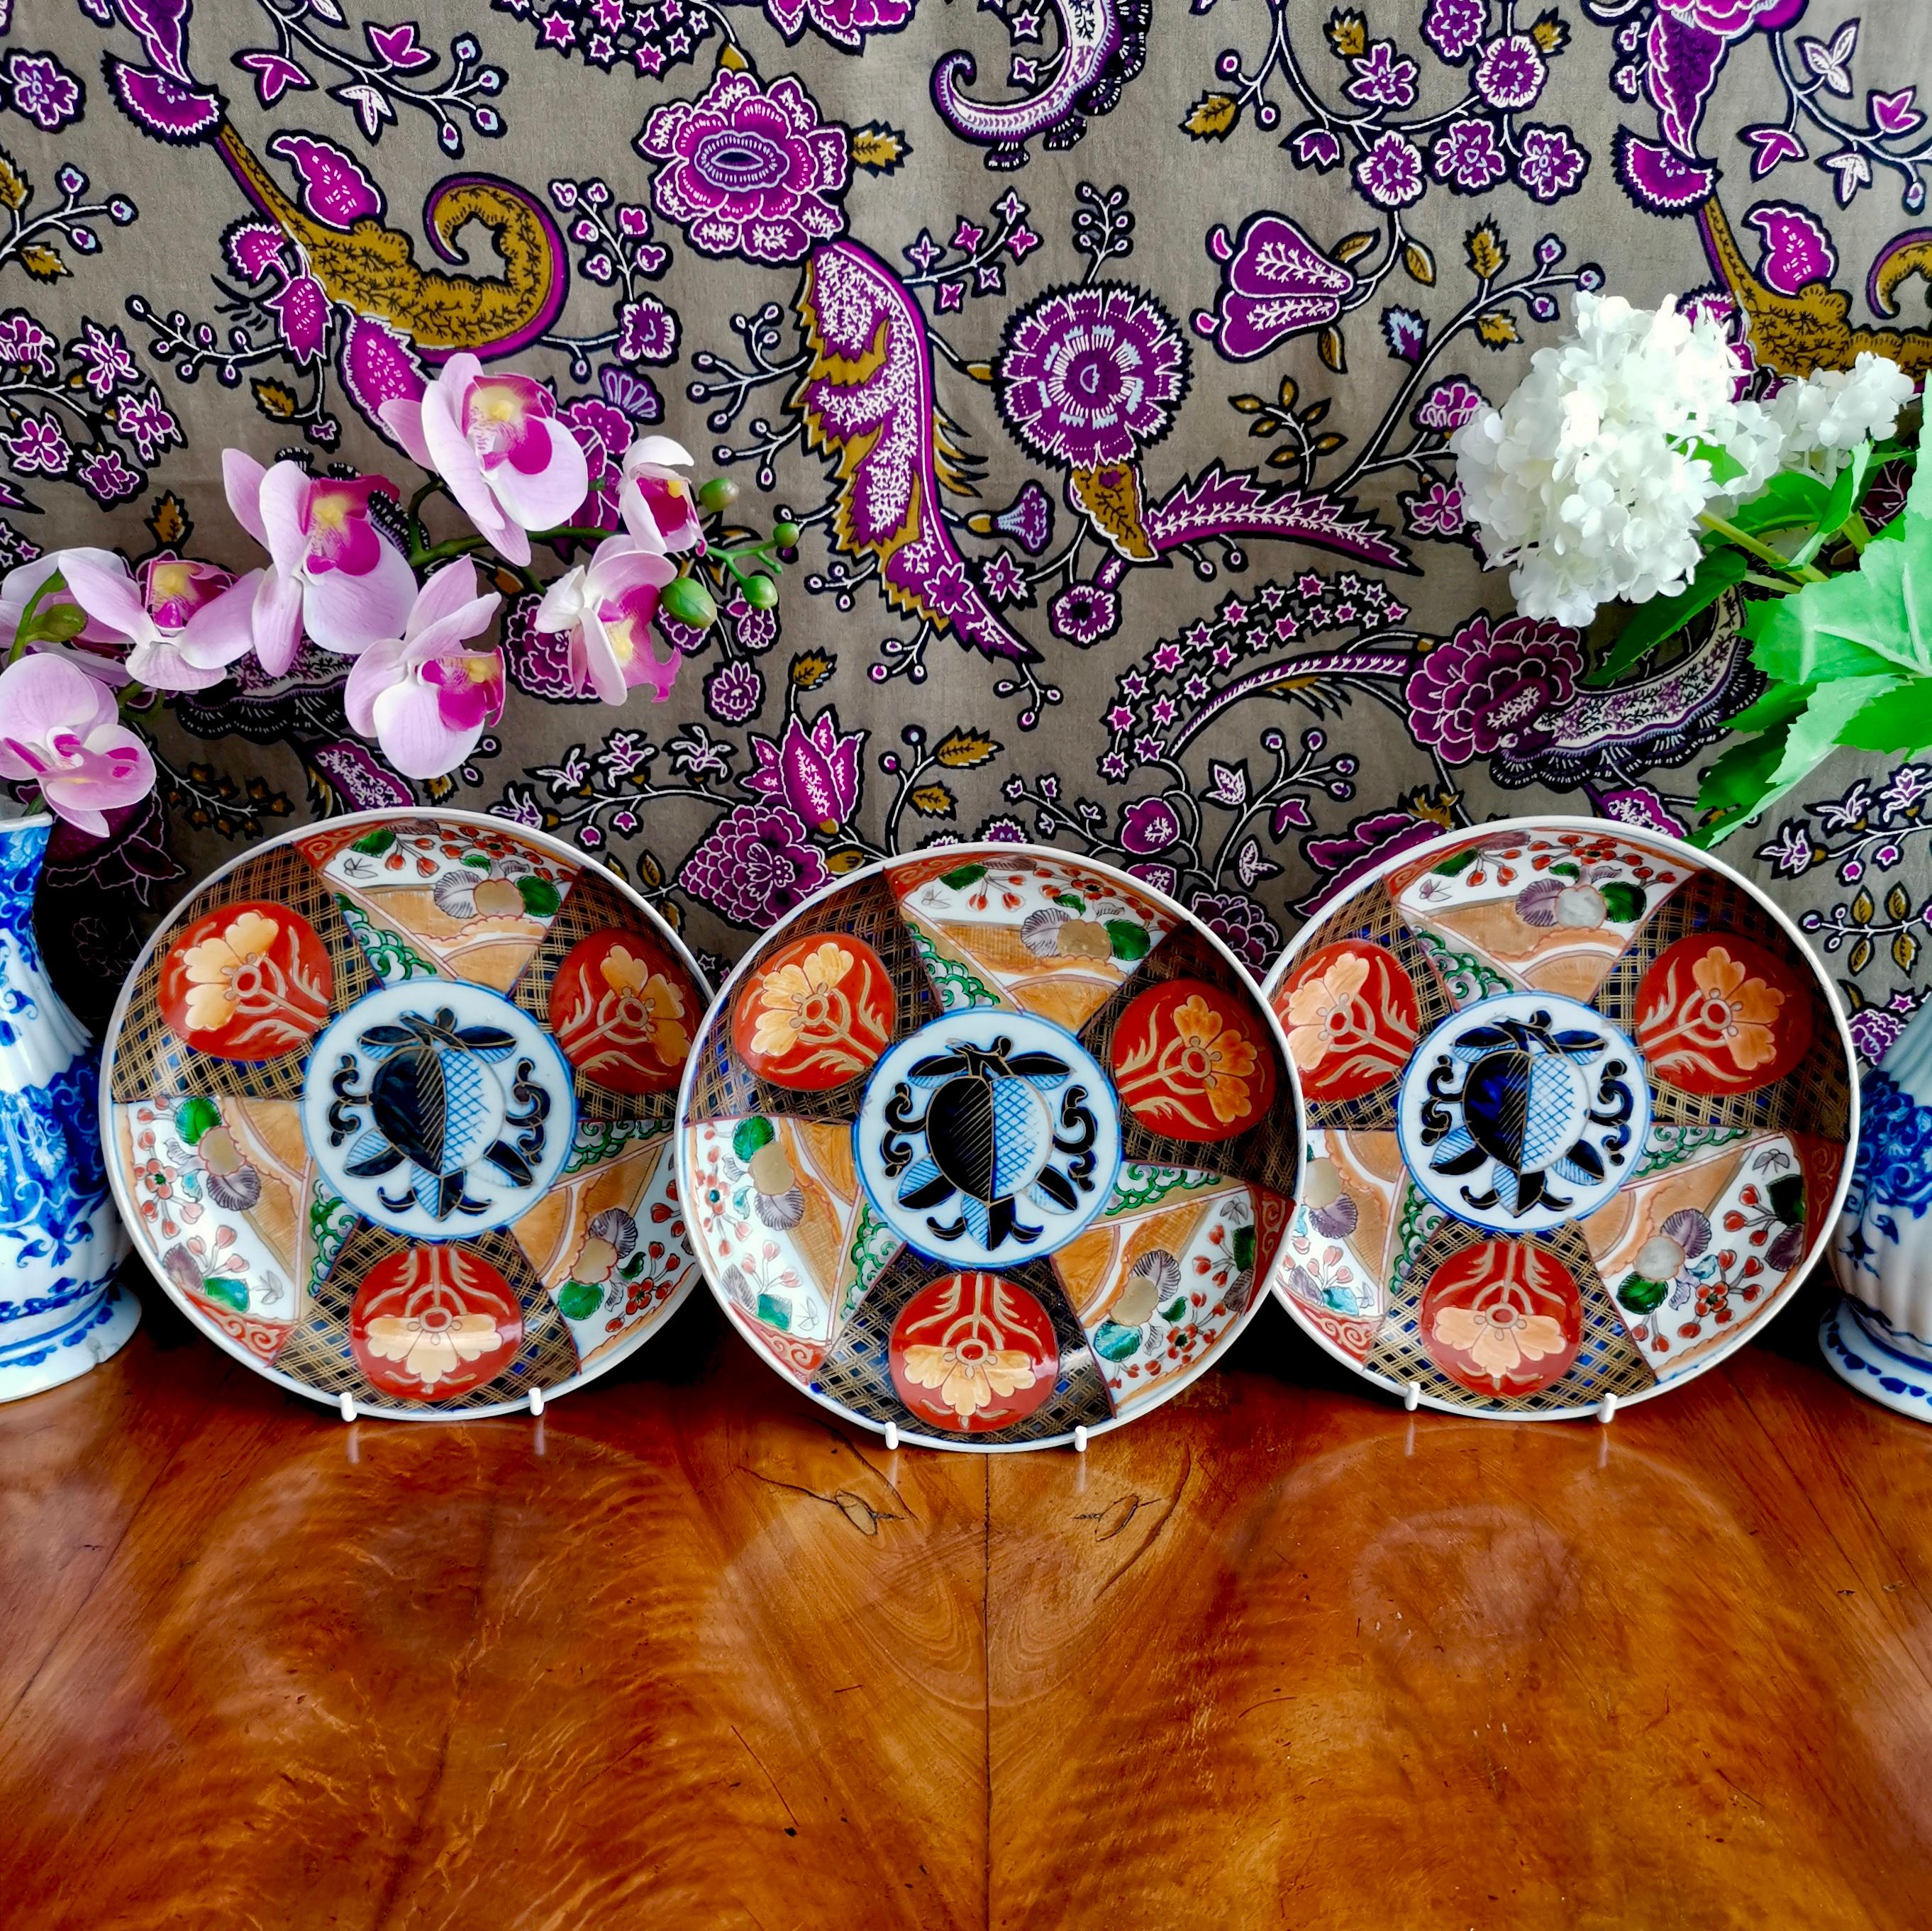 This is a set of three Japanese deep plates in the Imari style, most probably made in the late 19th or early 20th century, in the late Meiji period. The decoration is a 